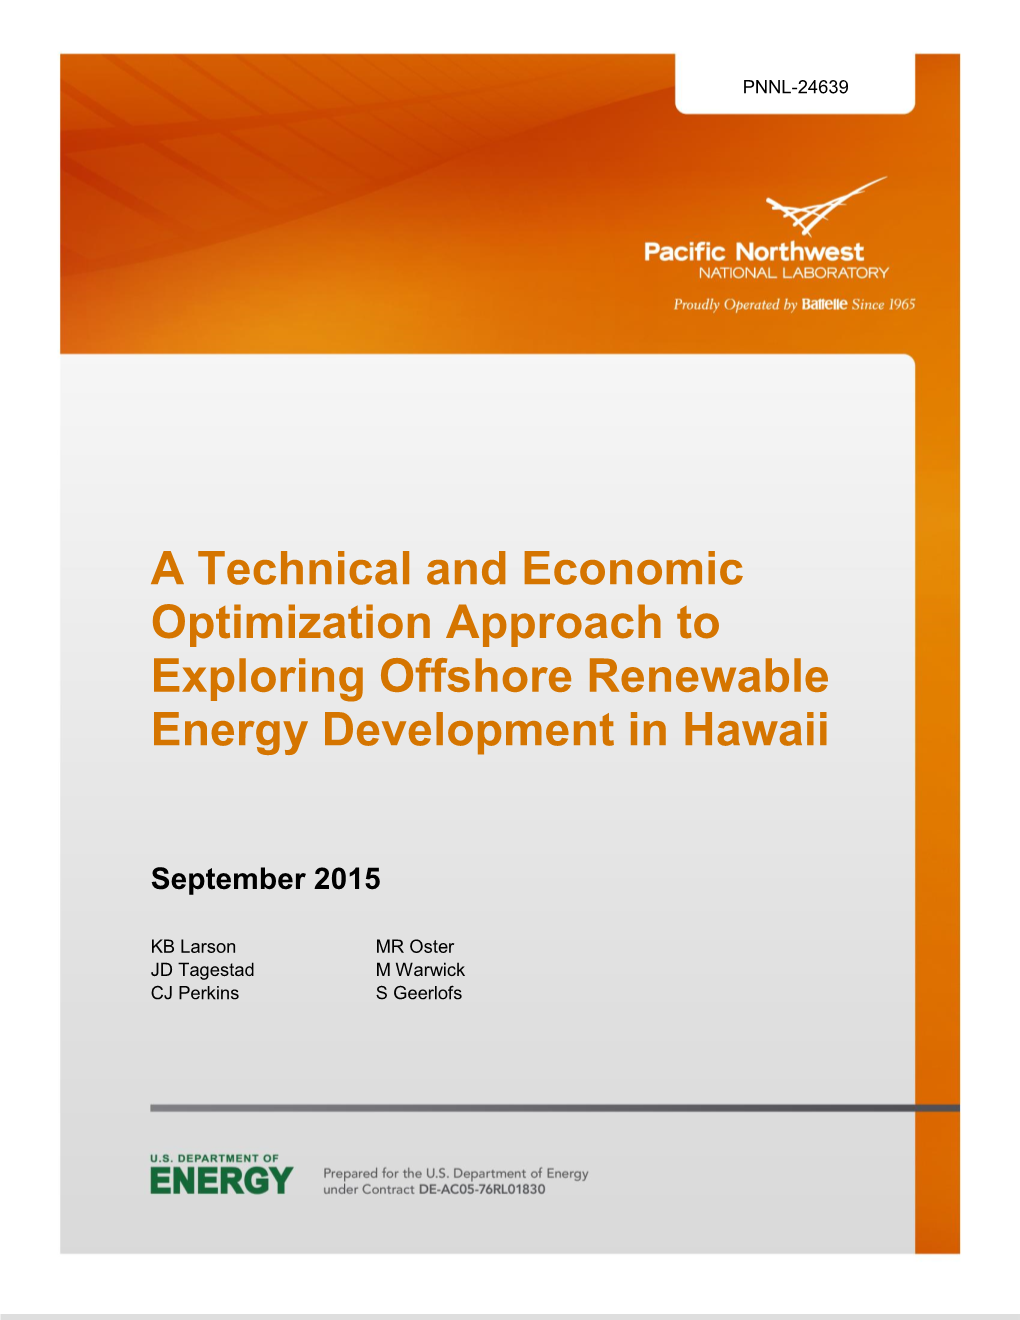 A Technical and Economic Optimization Approach to Exploring Offshore Renewable Energy Development in Hawaii